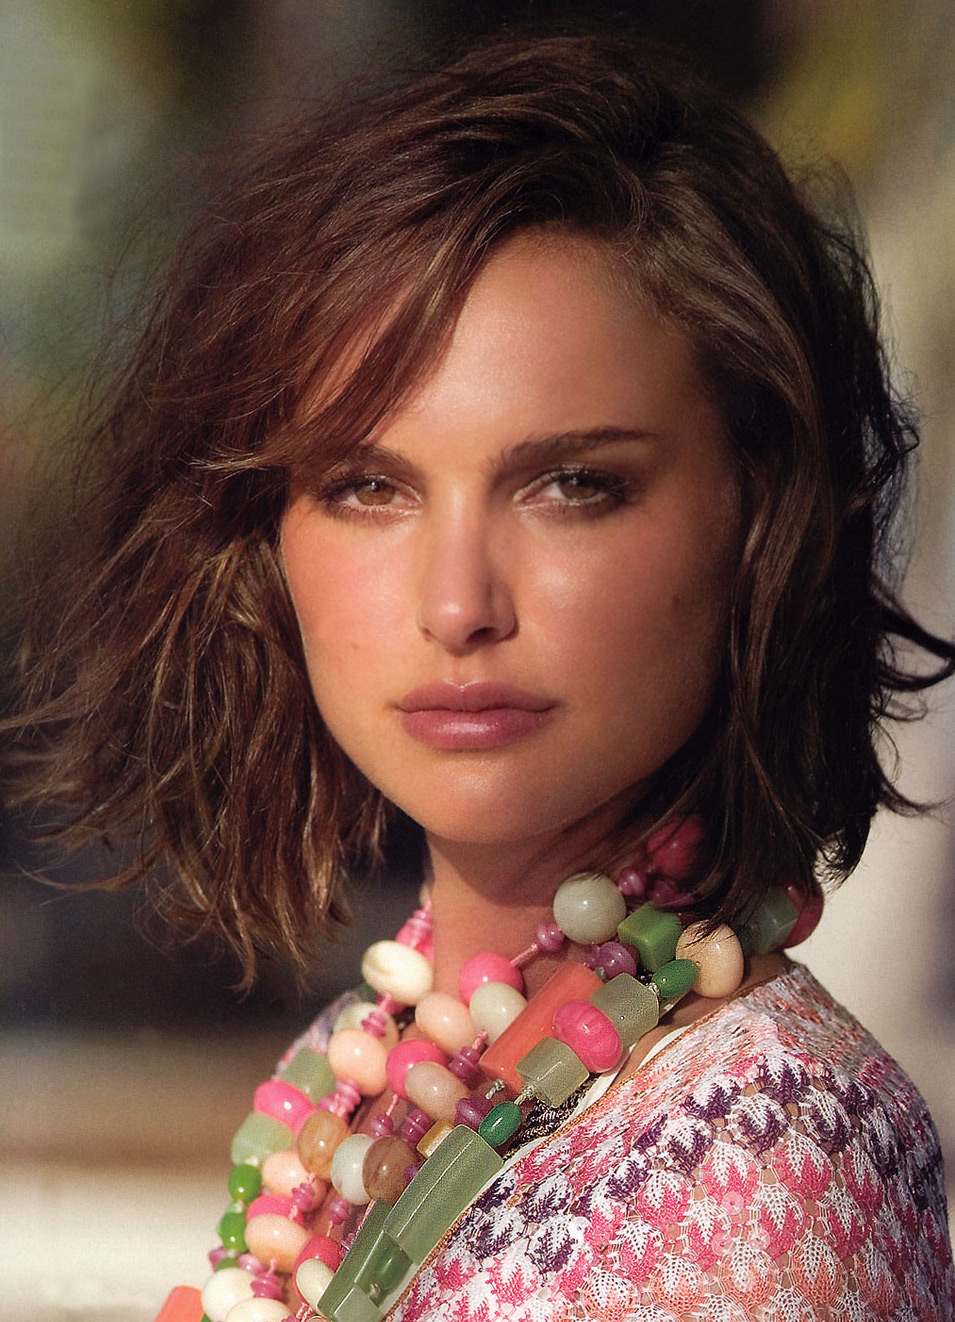 Natalie Portman A Very Very Beautiful Woman 84008045 Added By Yuglana At Importance Of Haircuts